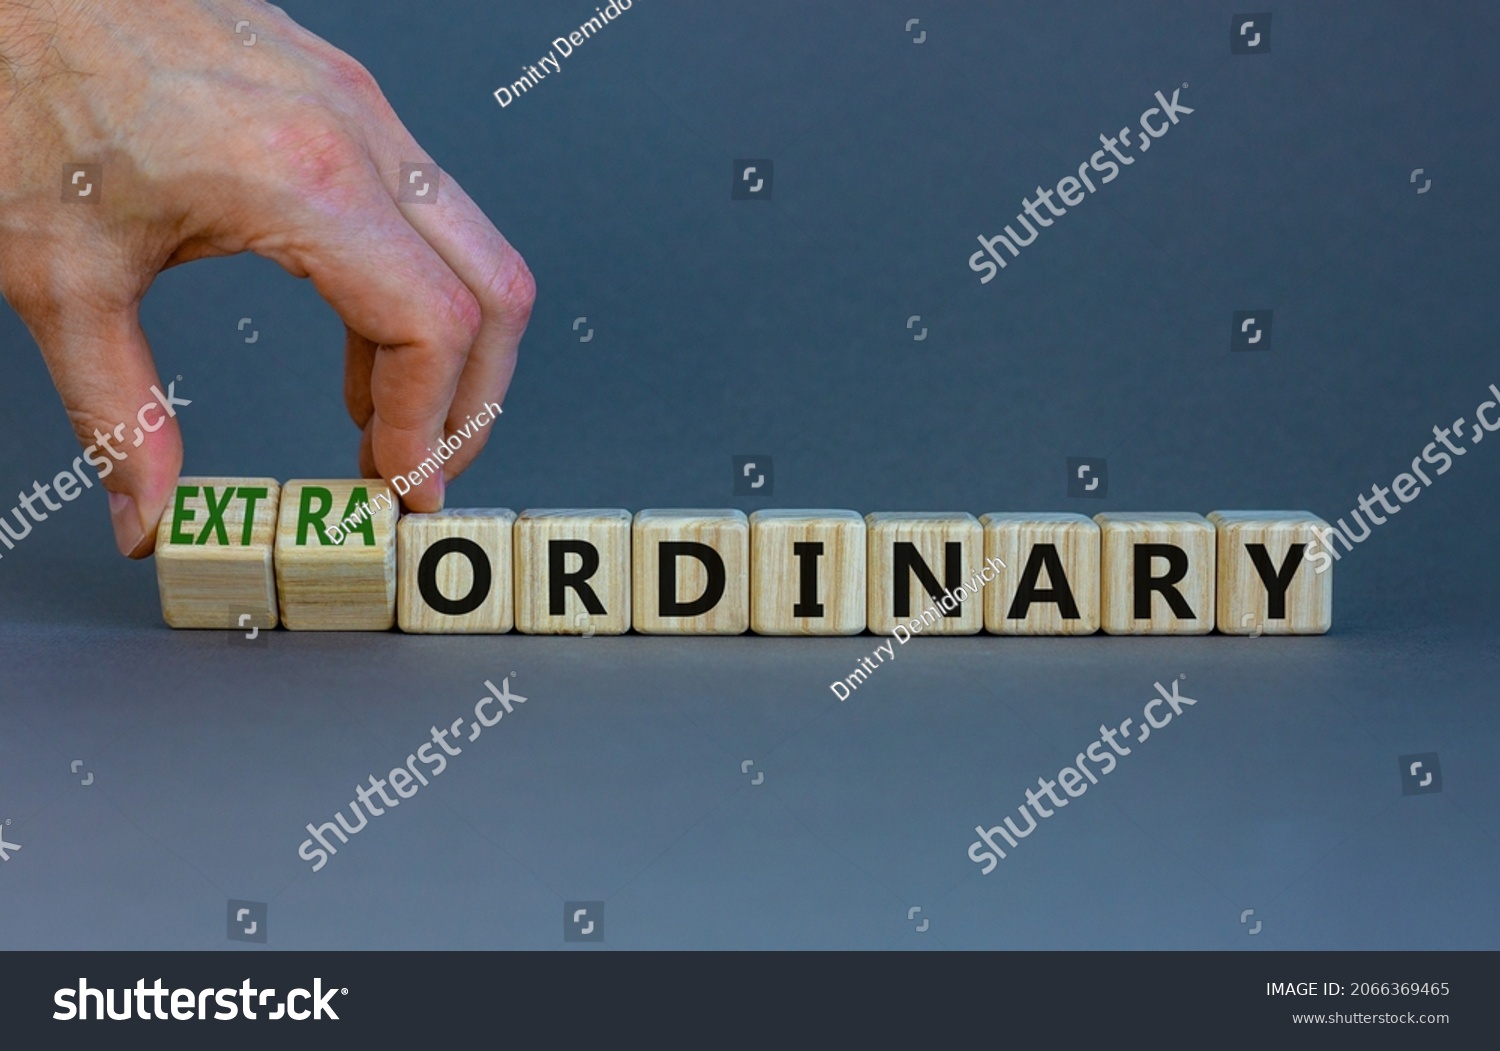 Ordinary or extraordinary symbol. Businessman turnes wooden cubes and changes words 'Ordinary extraordinary'. Beautiful grey background. Business, ordinary or extraordinary concept. Copy space. #2066369465